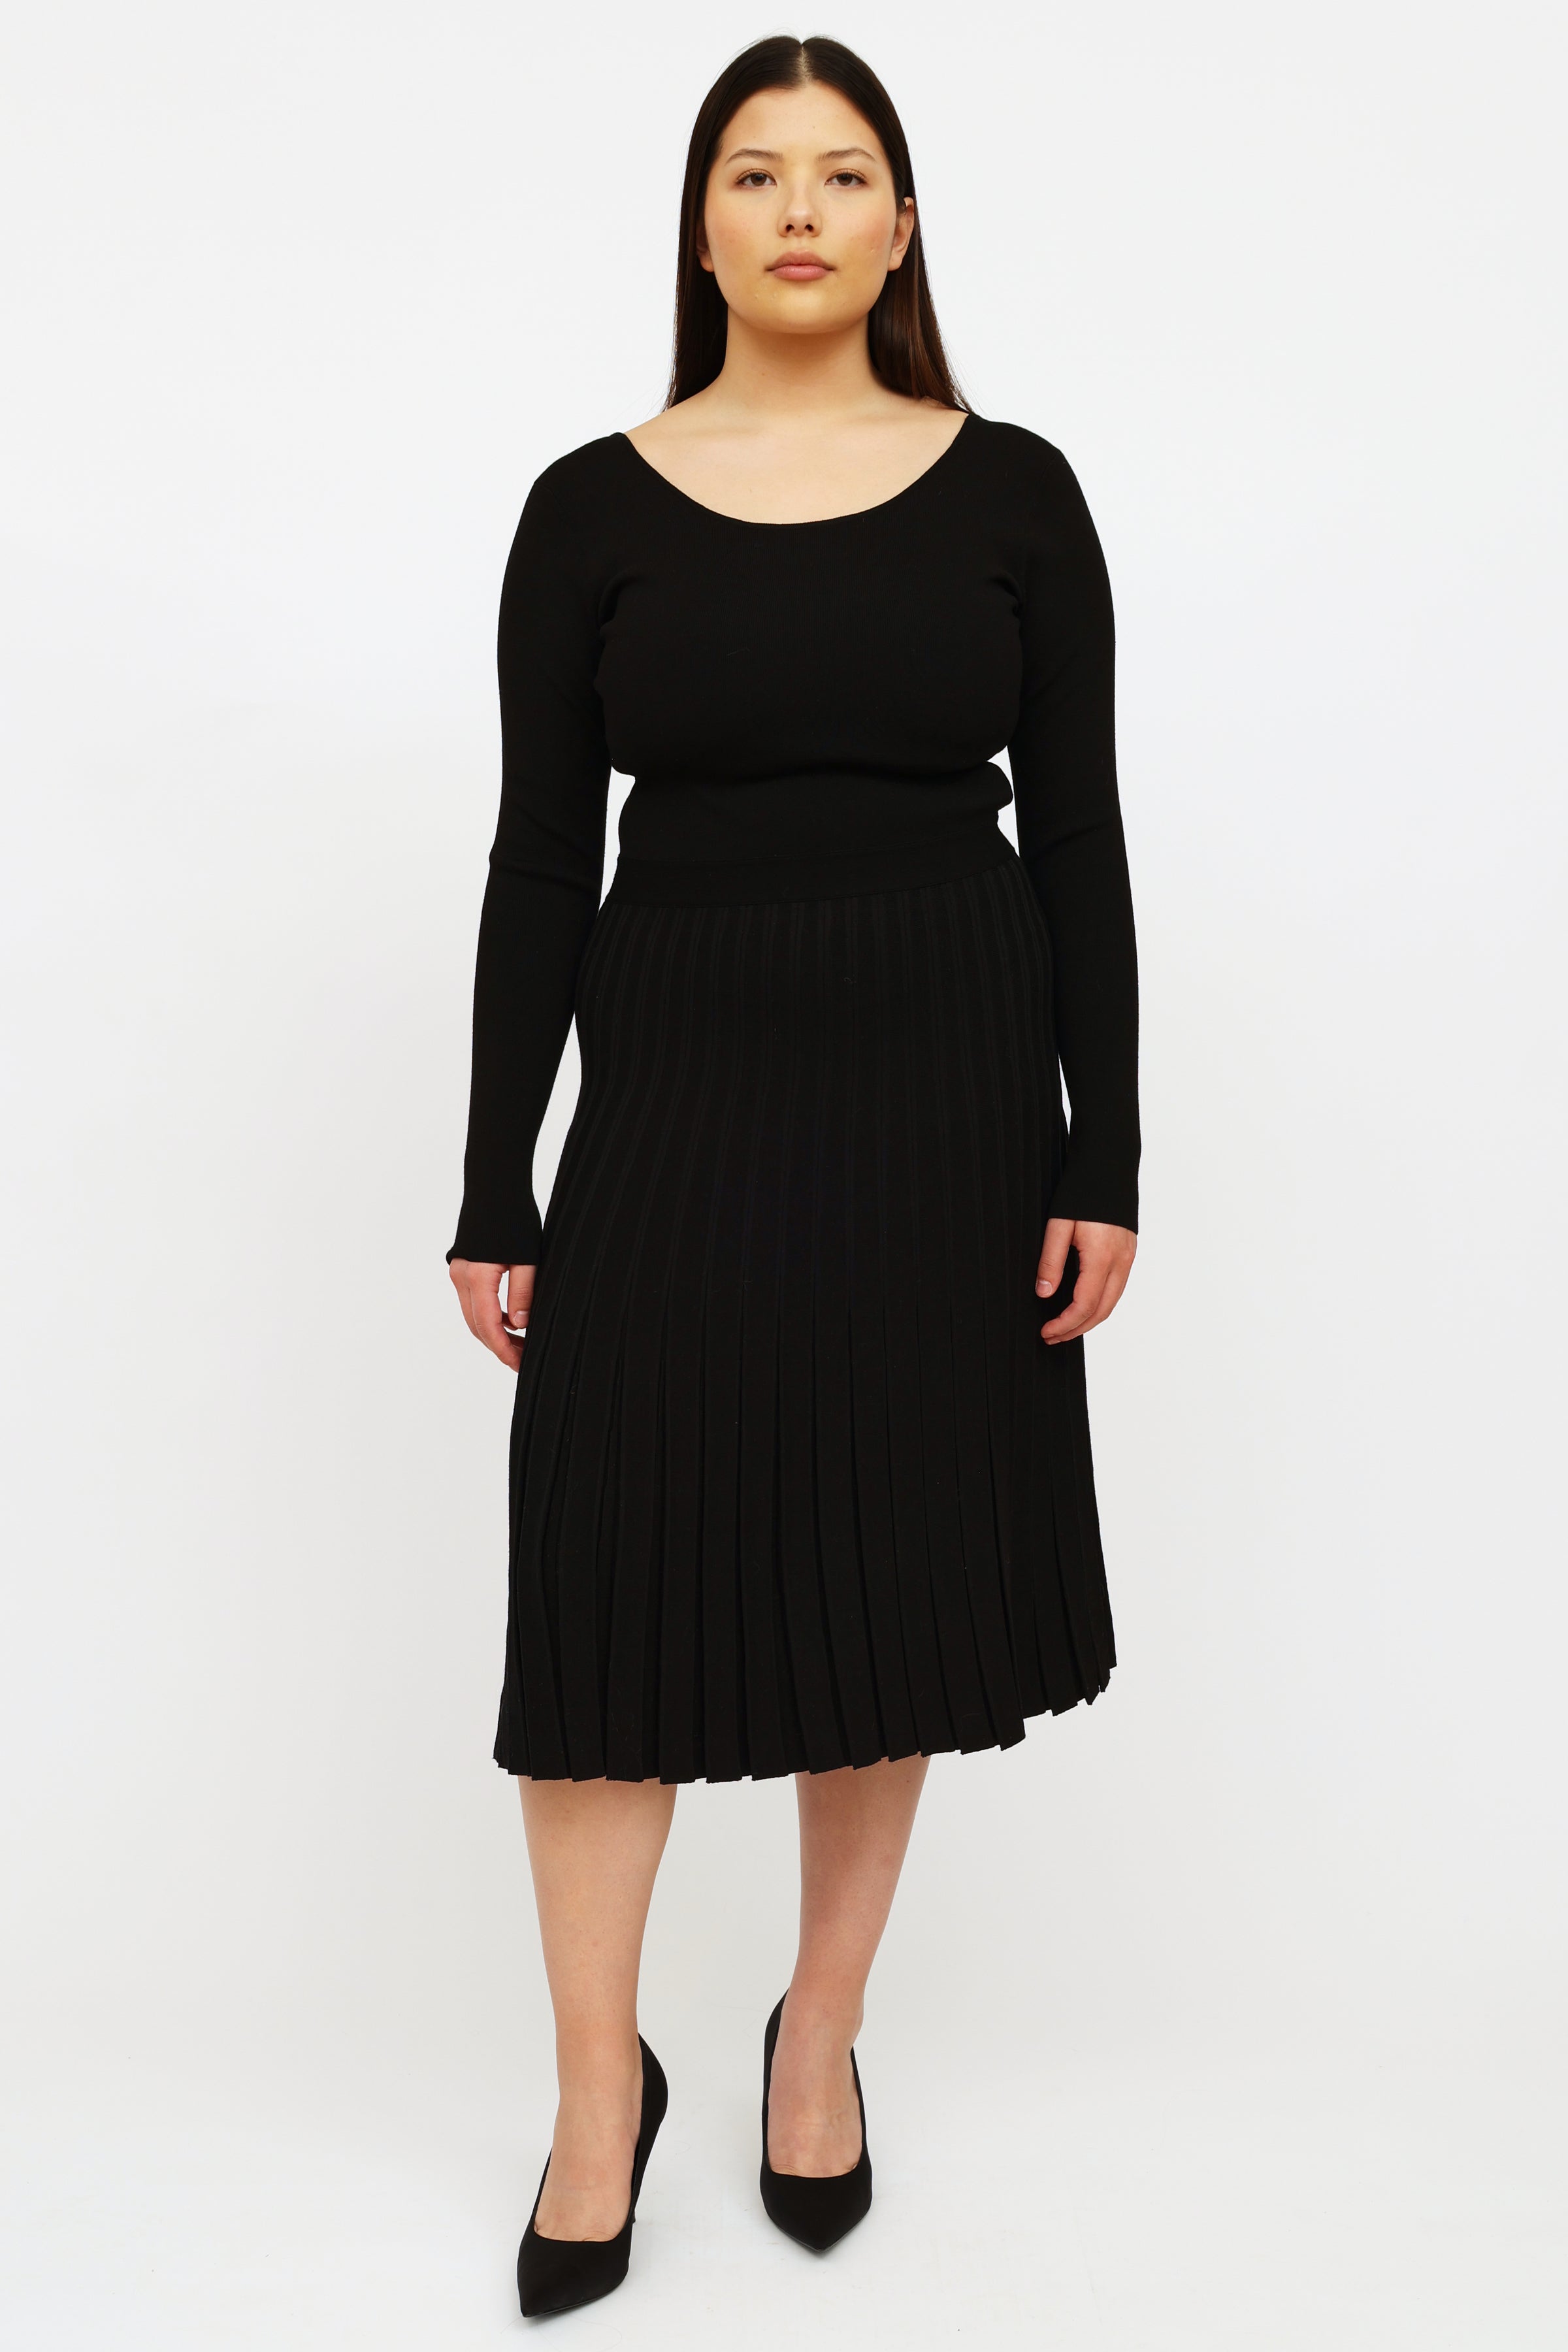 Tory Burch // Black Pleated Knit Dress – VSP Consignment